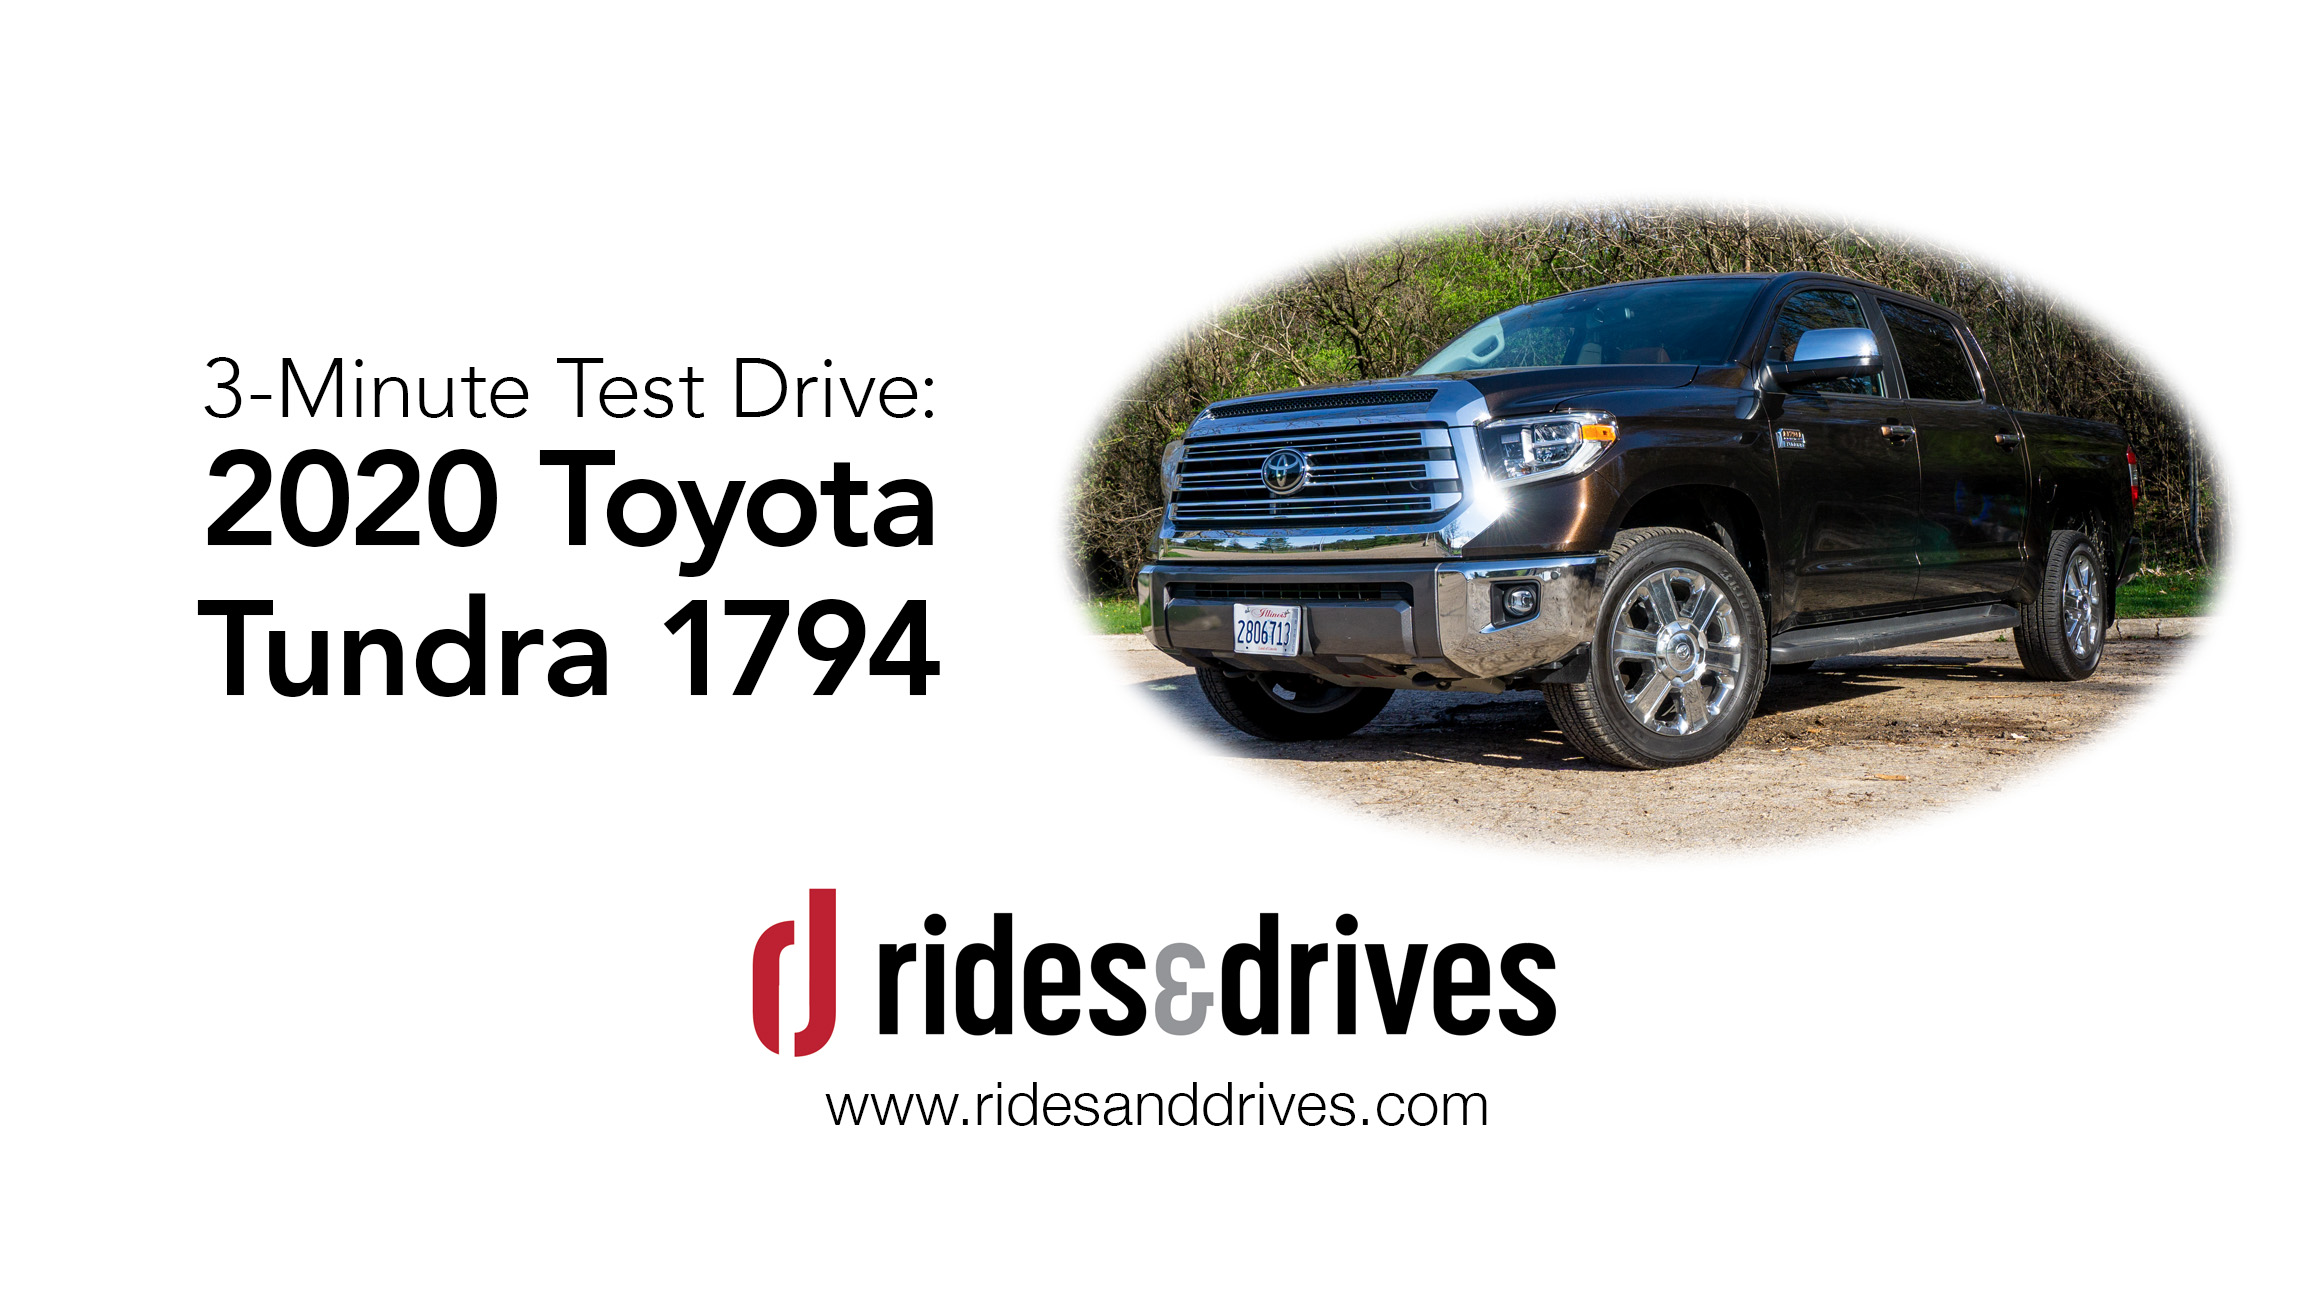 2020 Toyota Tundra 1794 Edition 3-minute test drive • Rides & Drives